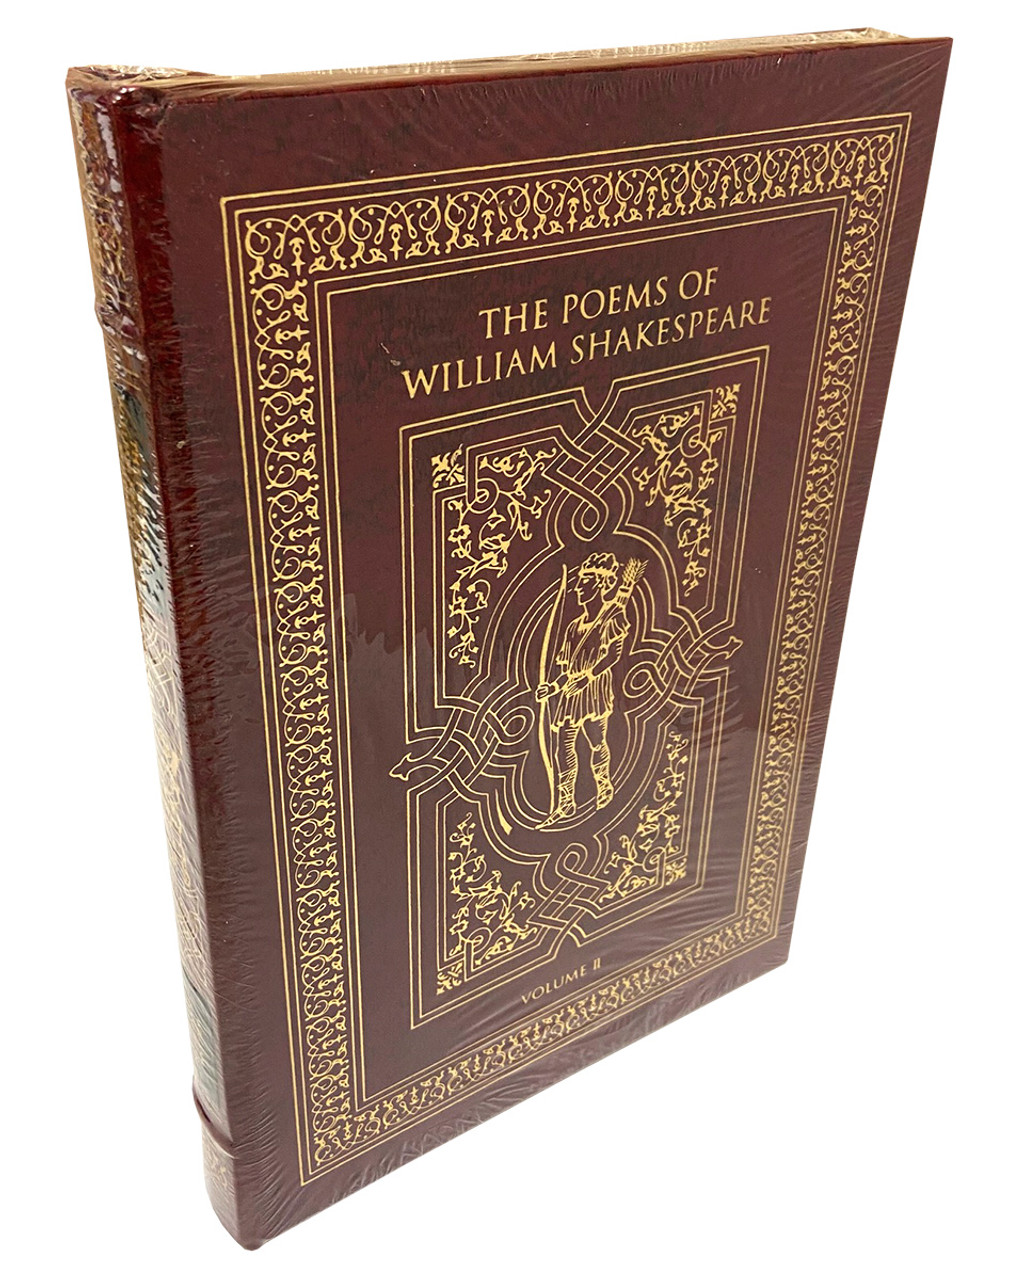 William Shakespeare "The Poems Of William Shakespeare: Volume II" Limited Edition, Leather Bound Collector's Edition [Sealed]